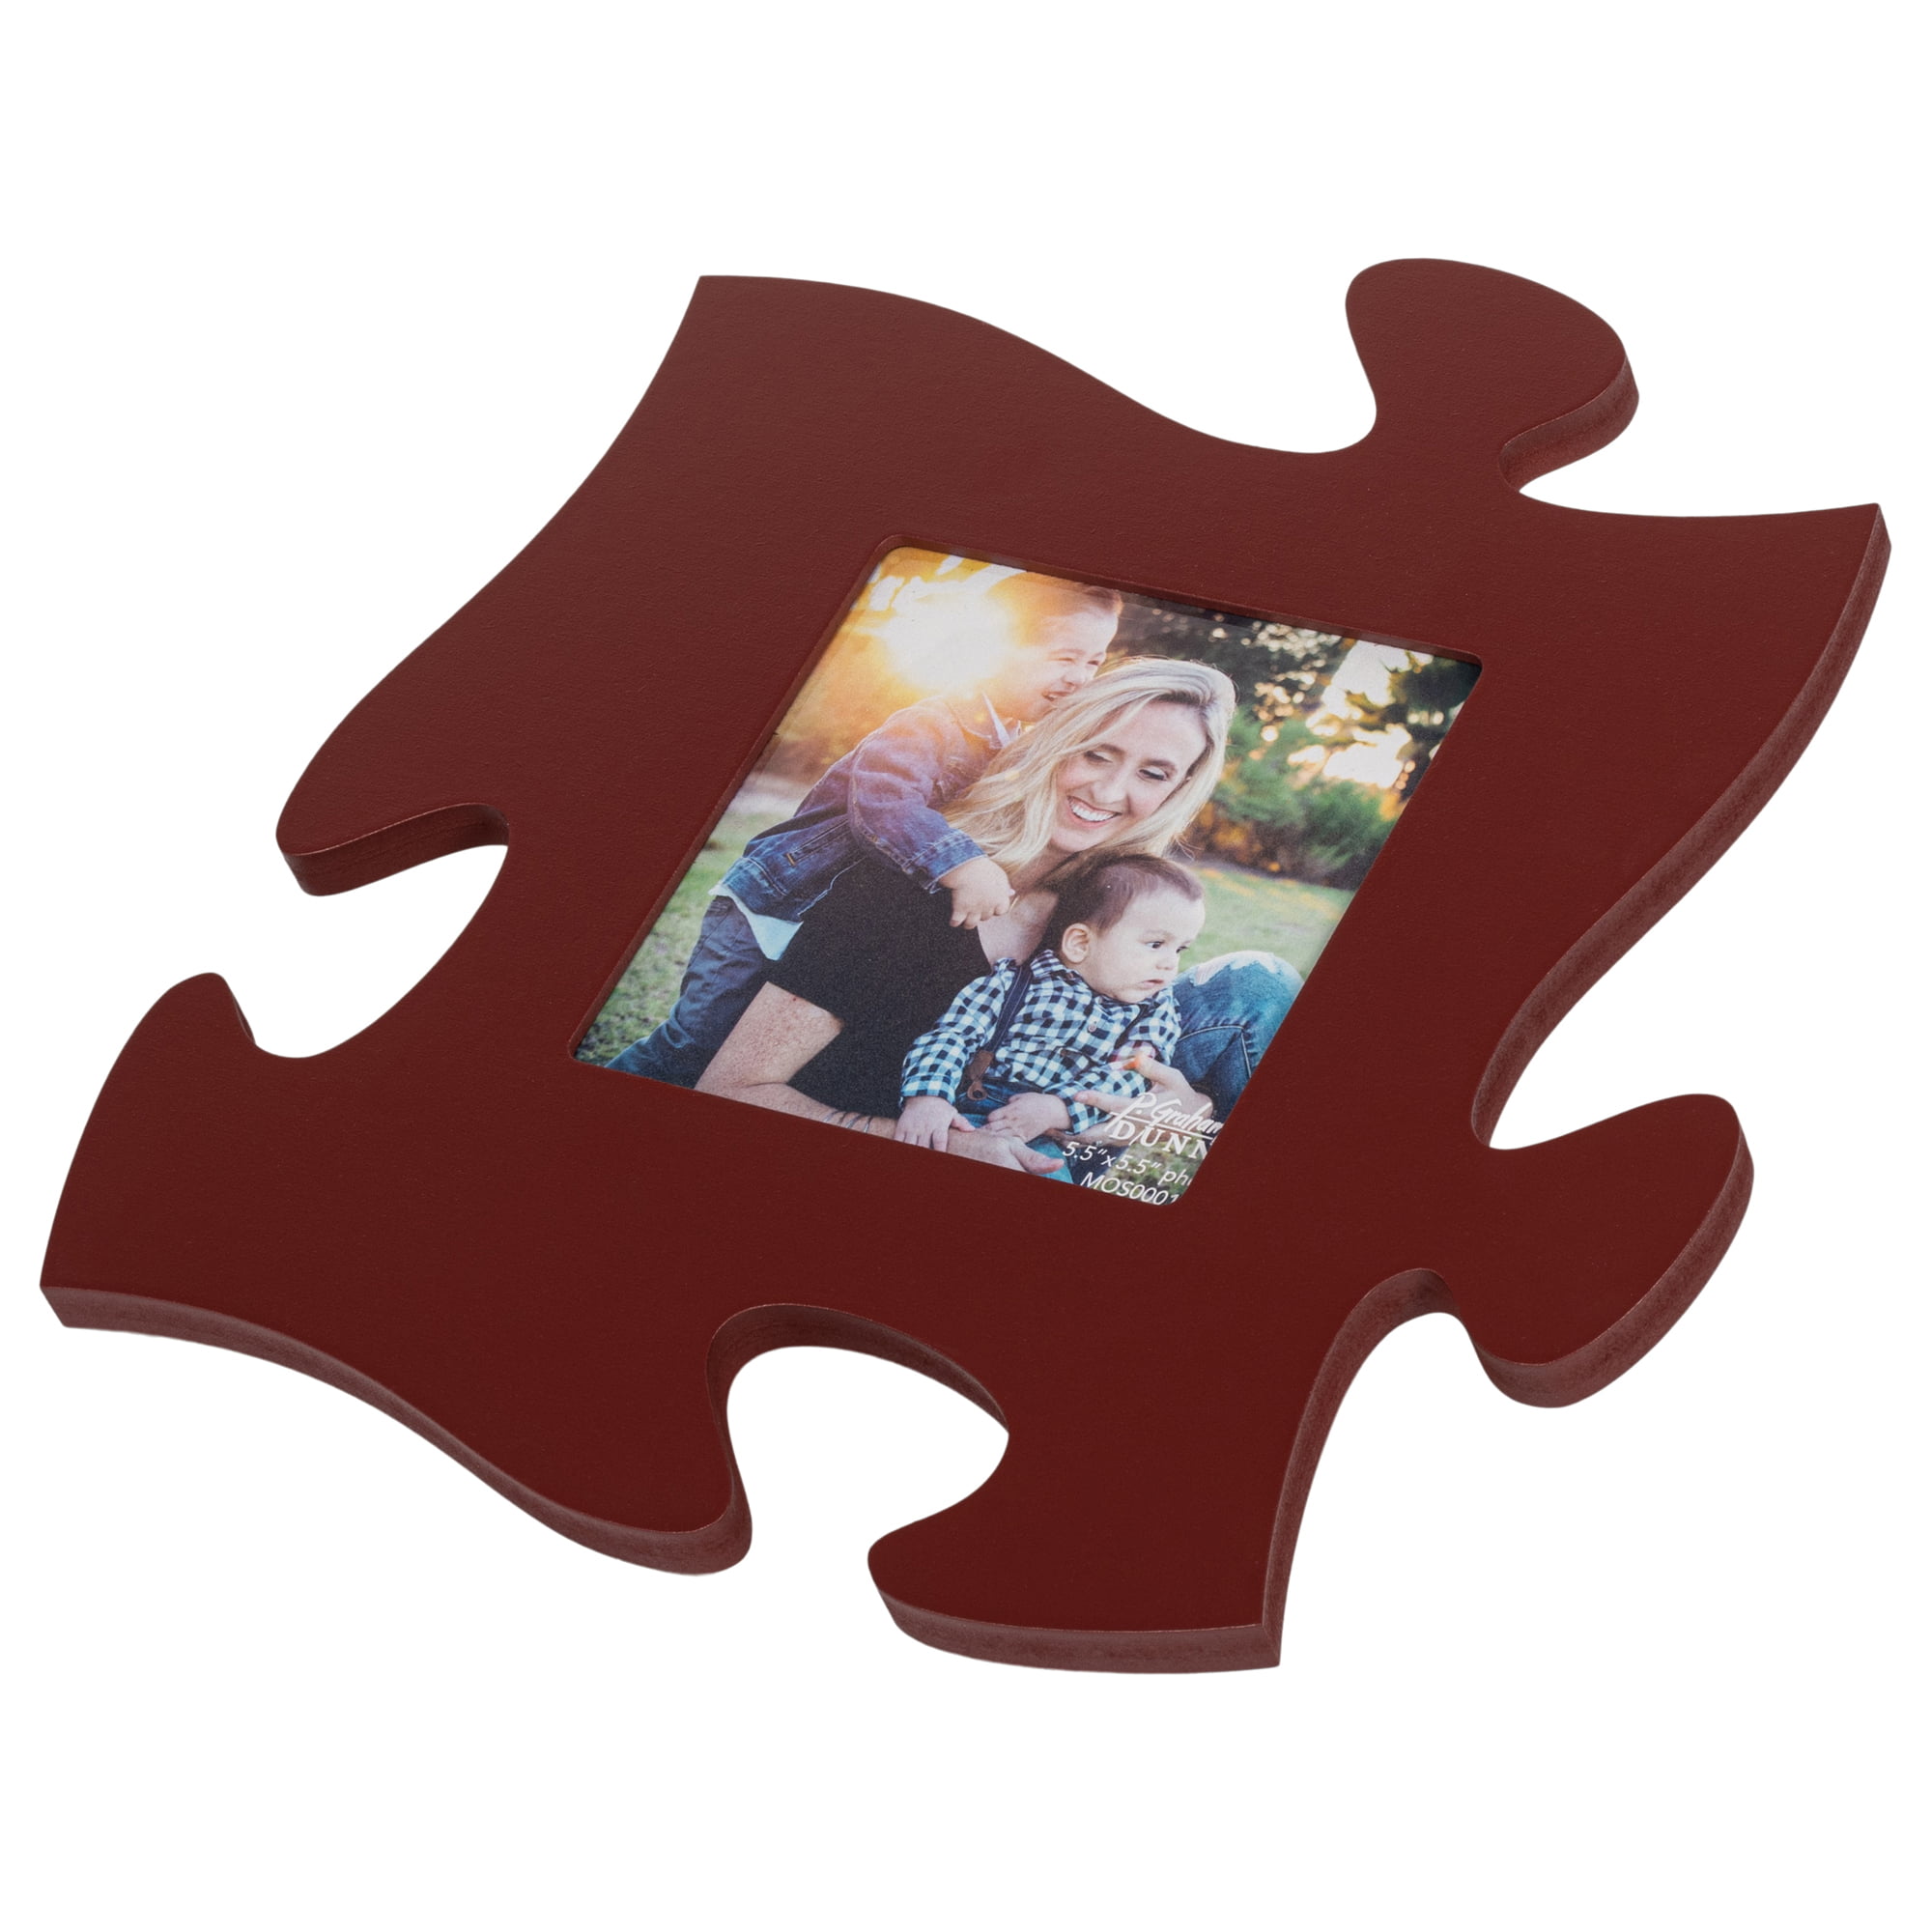 Cranberry Red 12 x 12 Wall Hanging Wood Puzzle Piece Photo Frame 